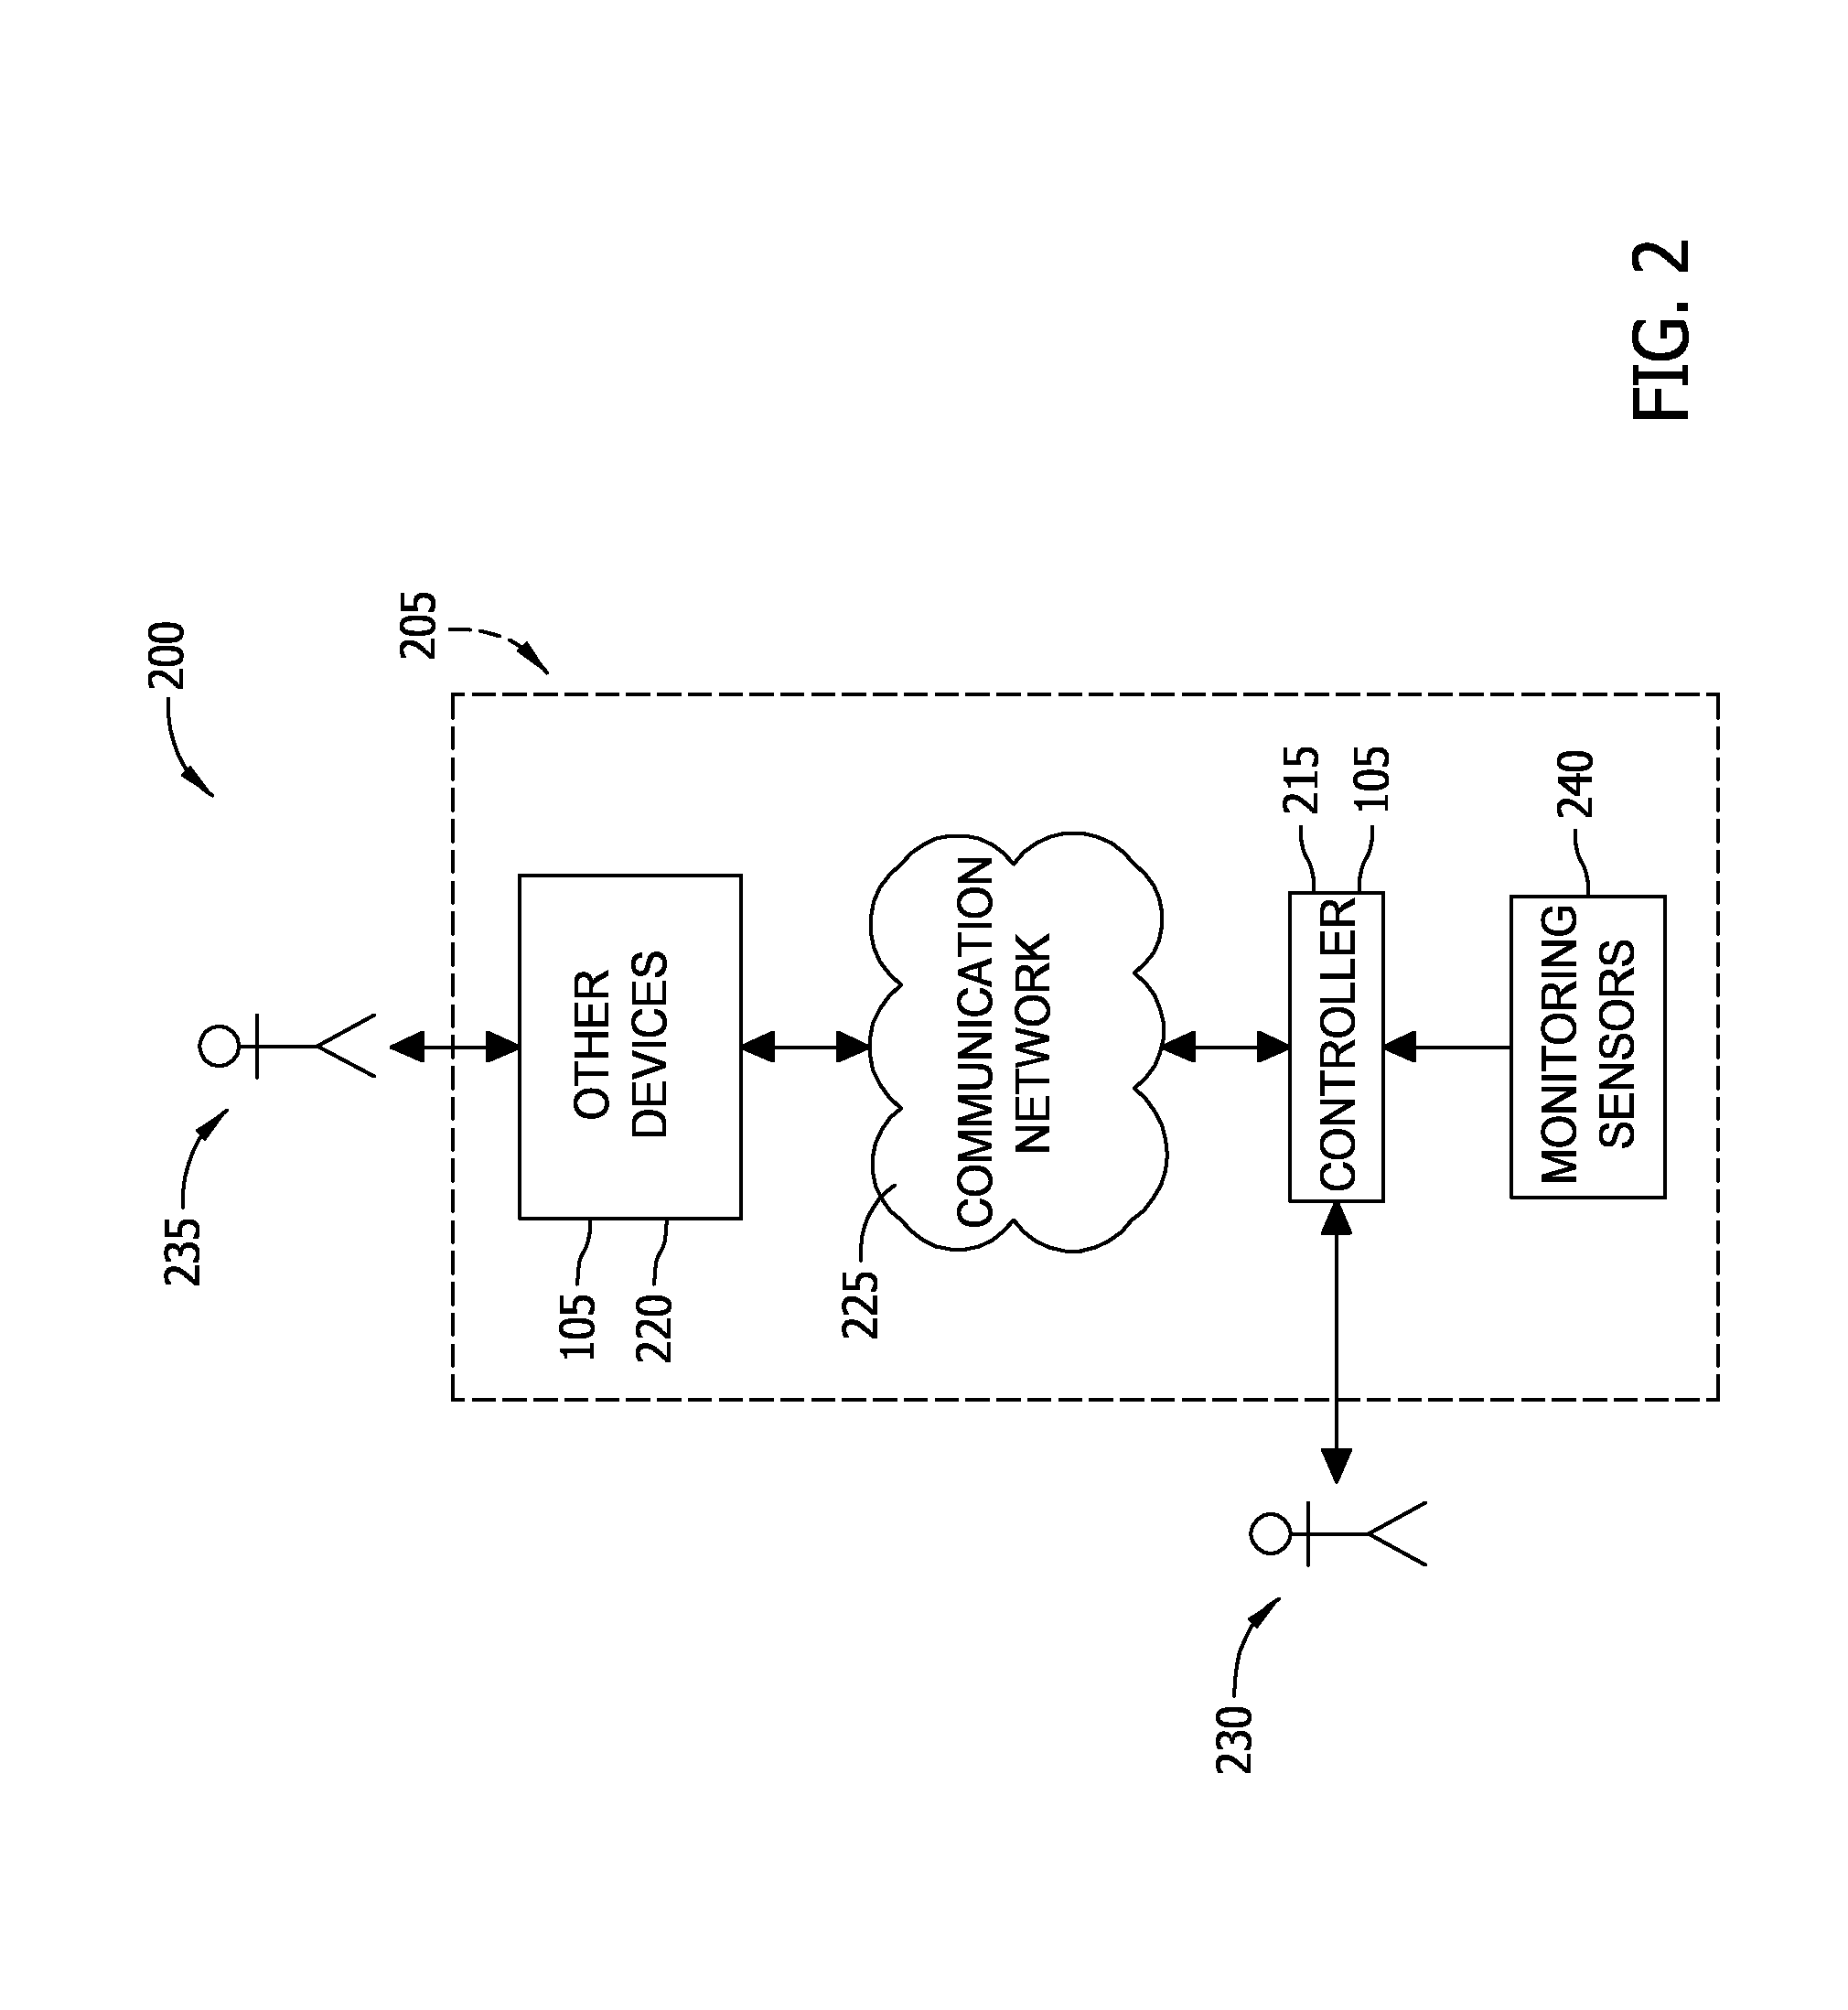 Auxiliary electric power system and method of regulating voltages of the same